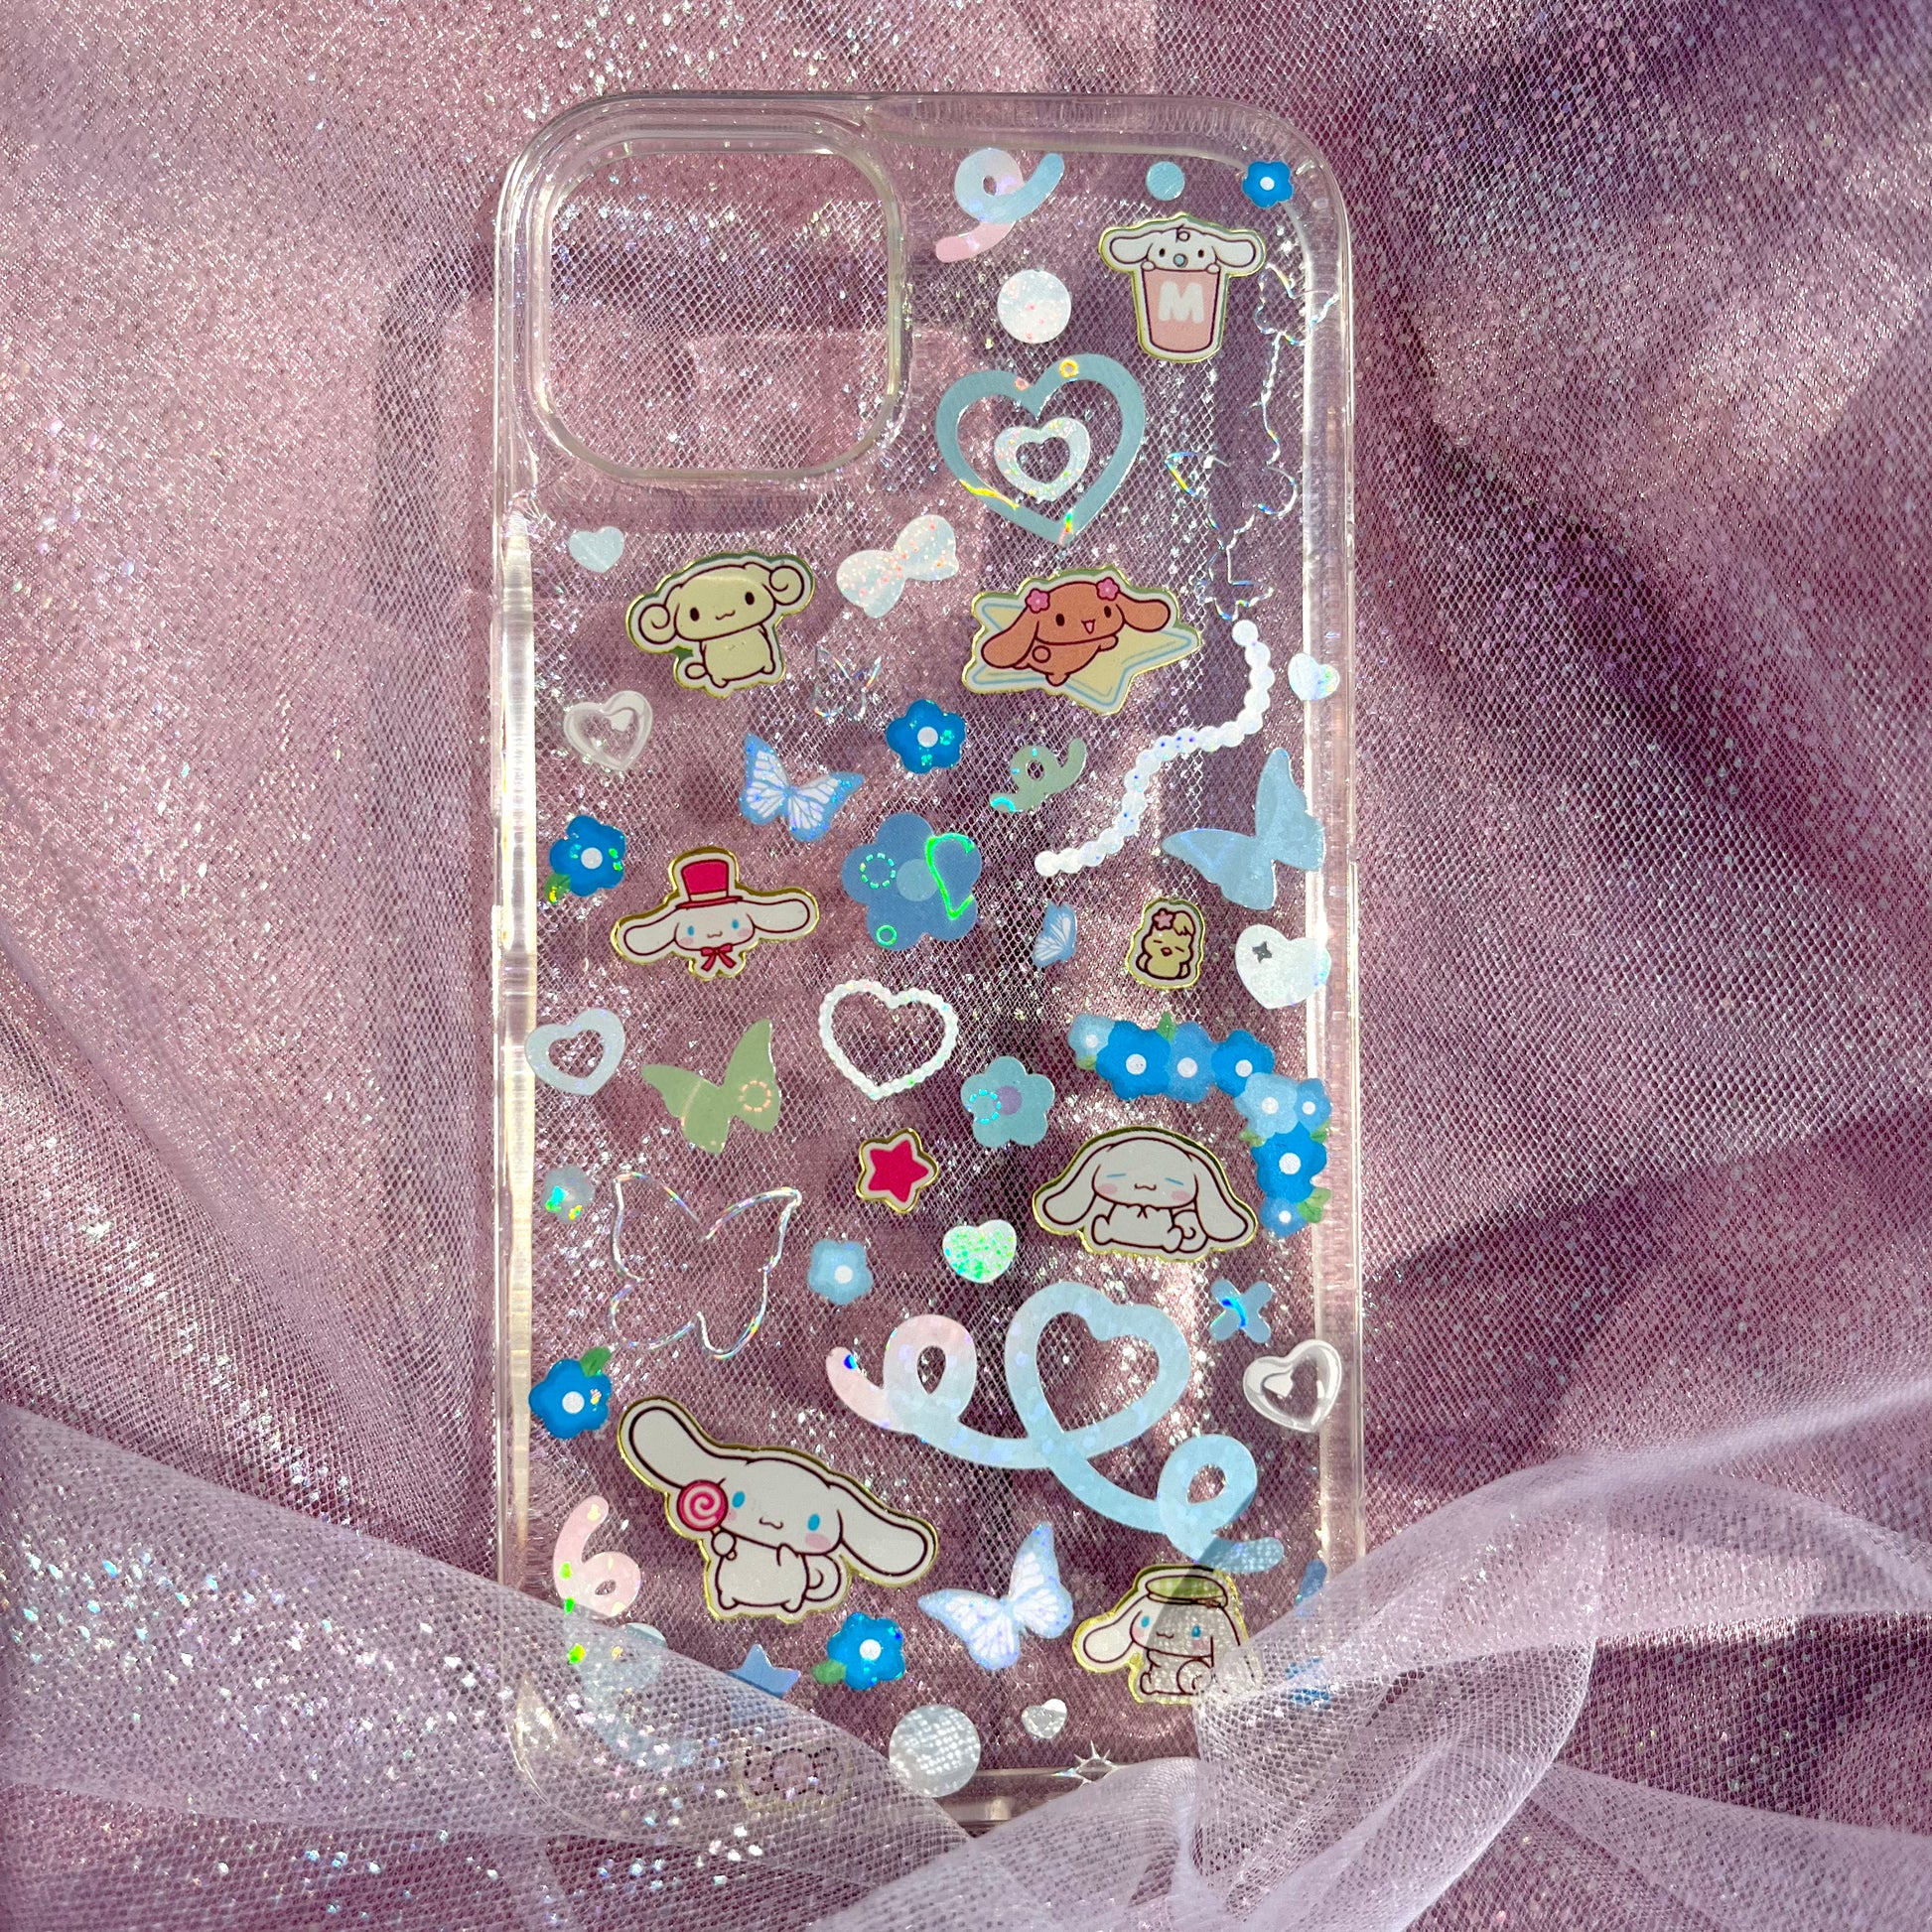 Bedazzled Phone Case - FJA Crafts